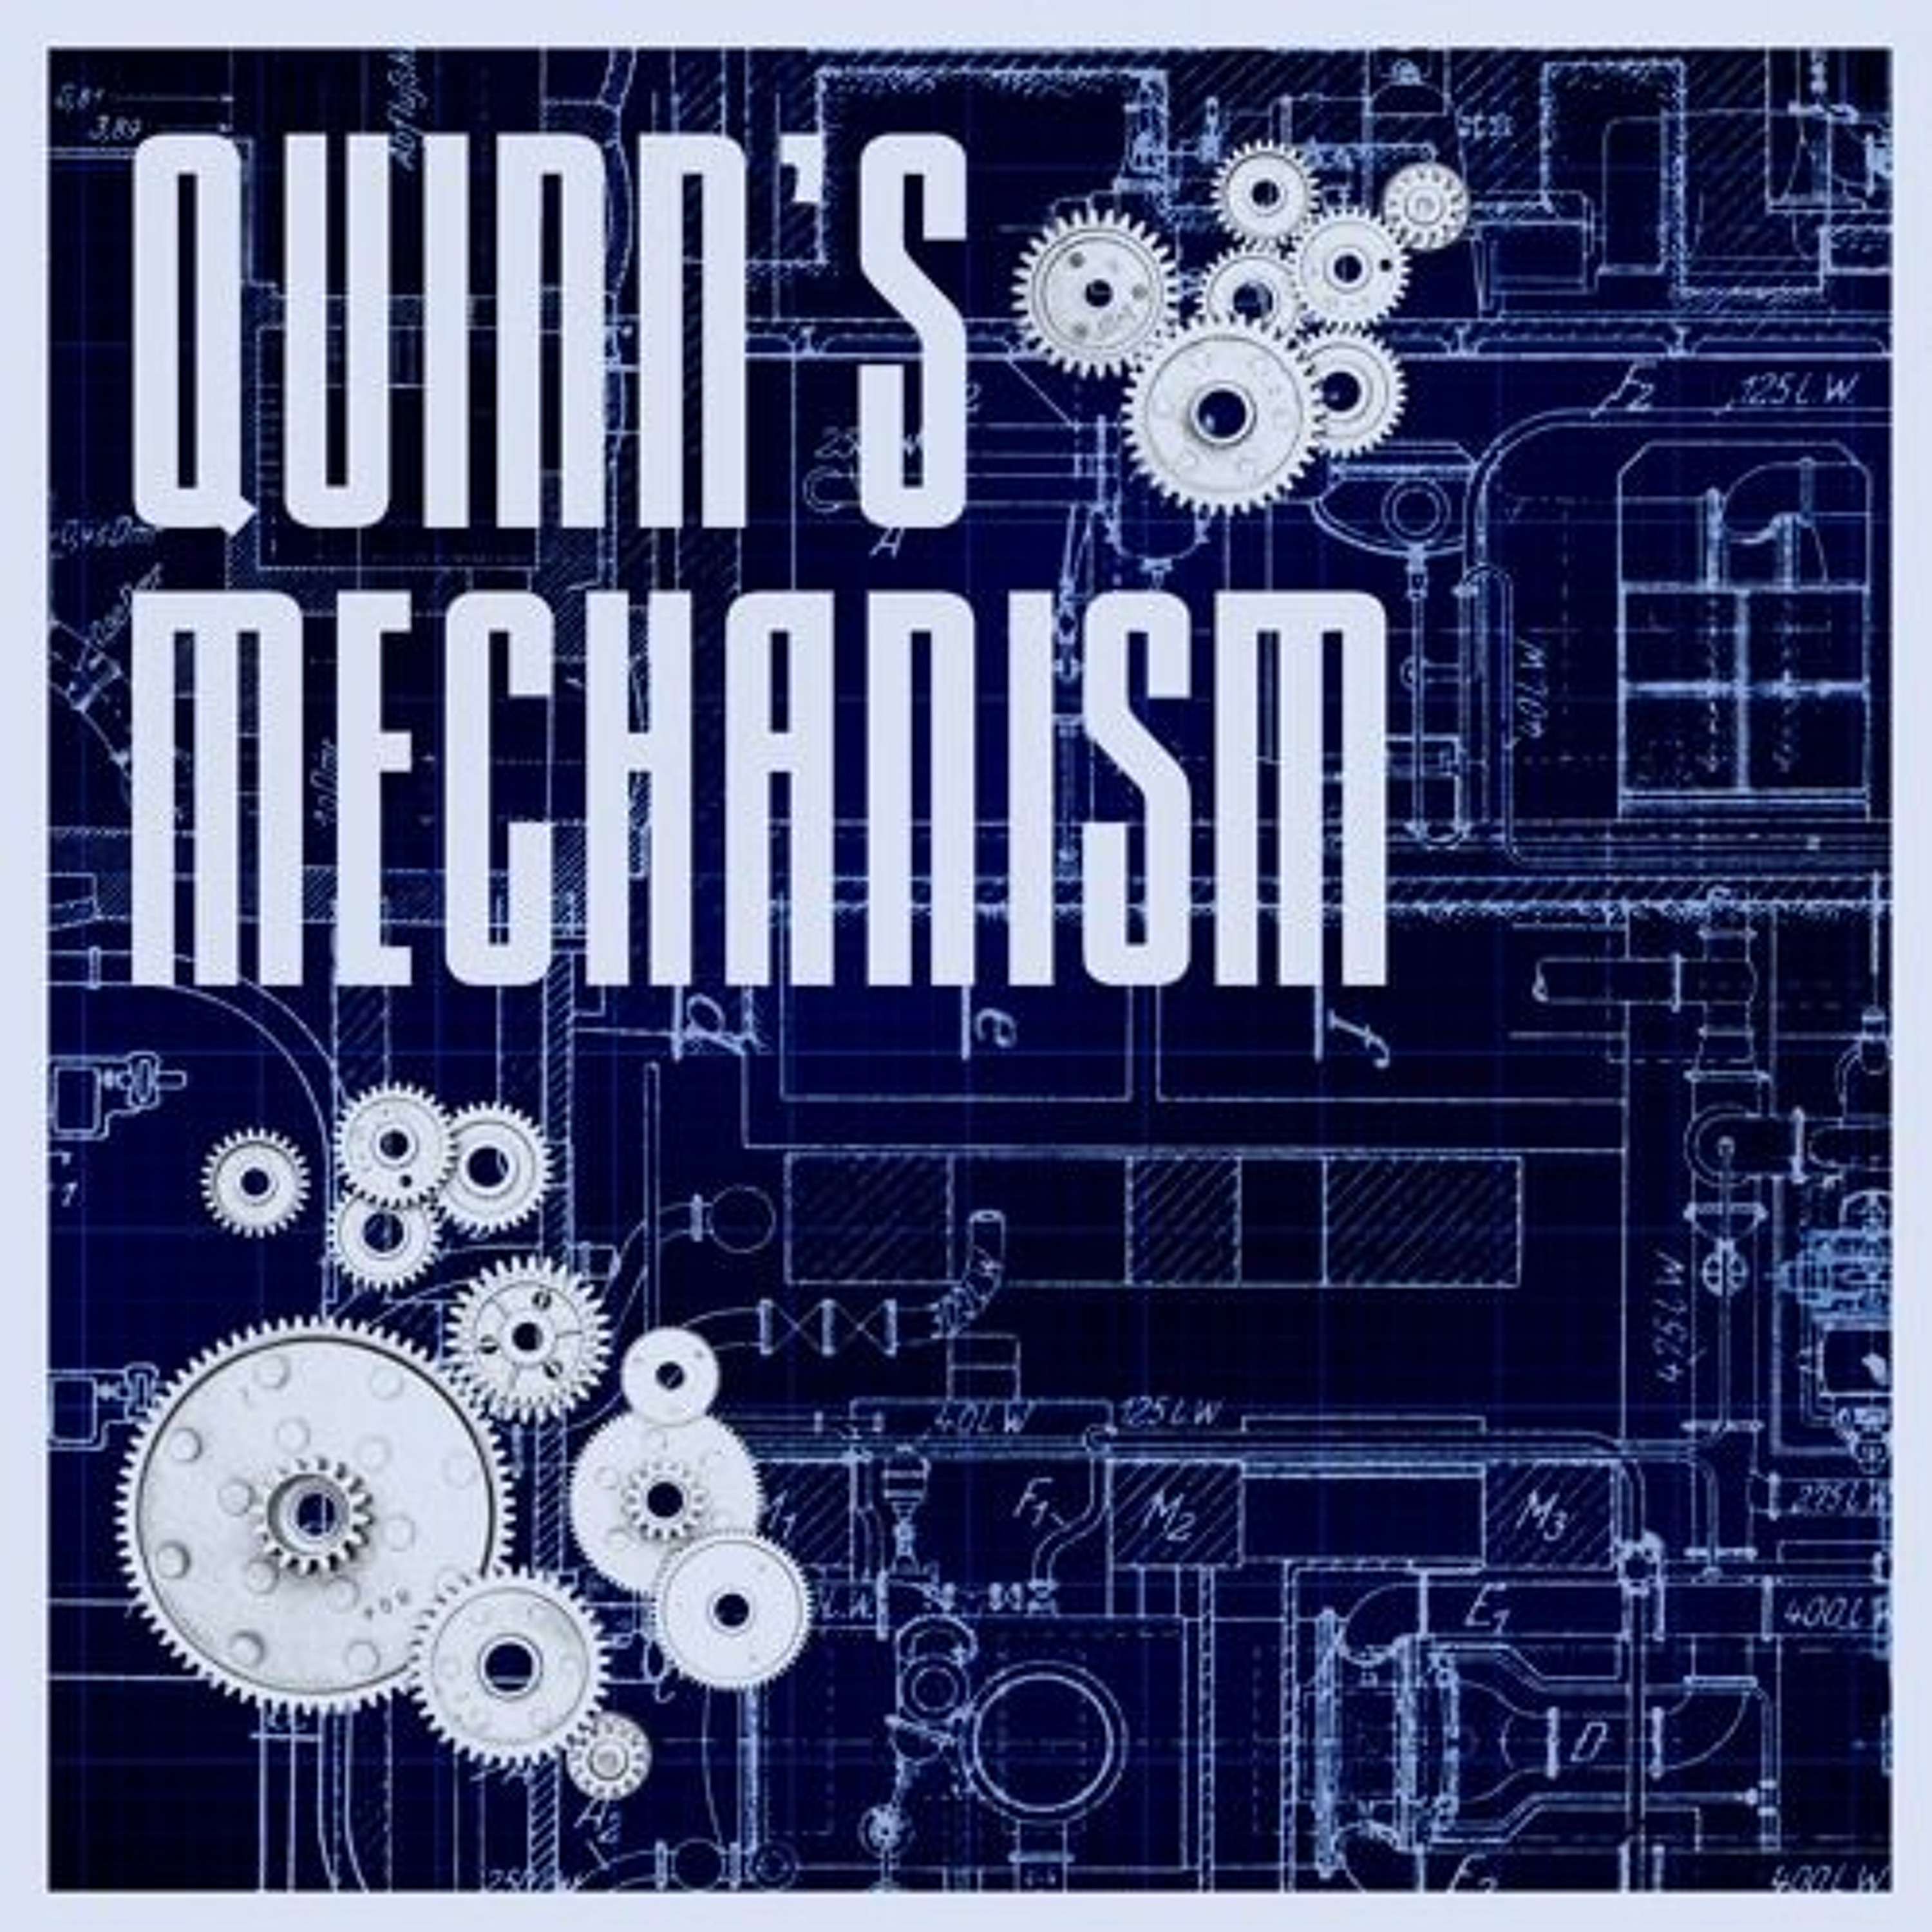 Quinn's Mechanism - Third Act, The Fourth Component